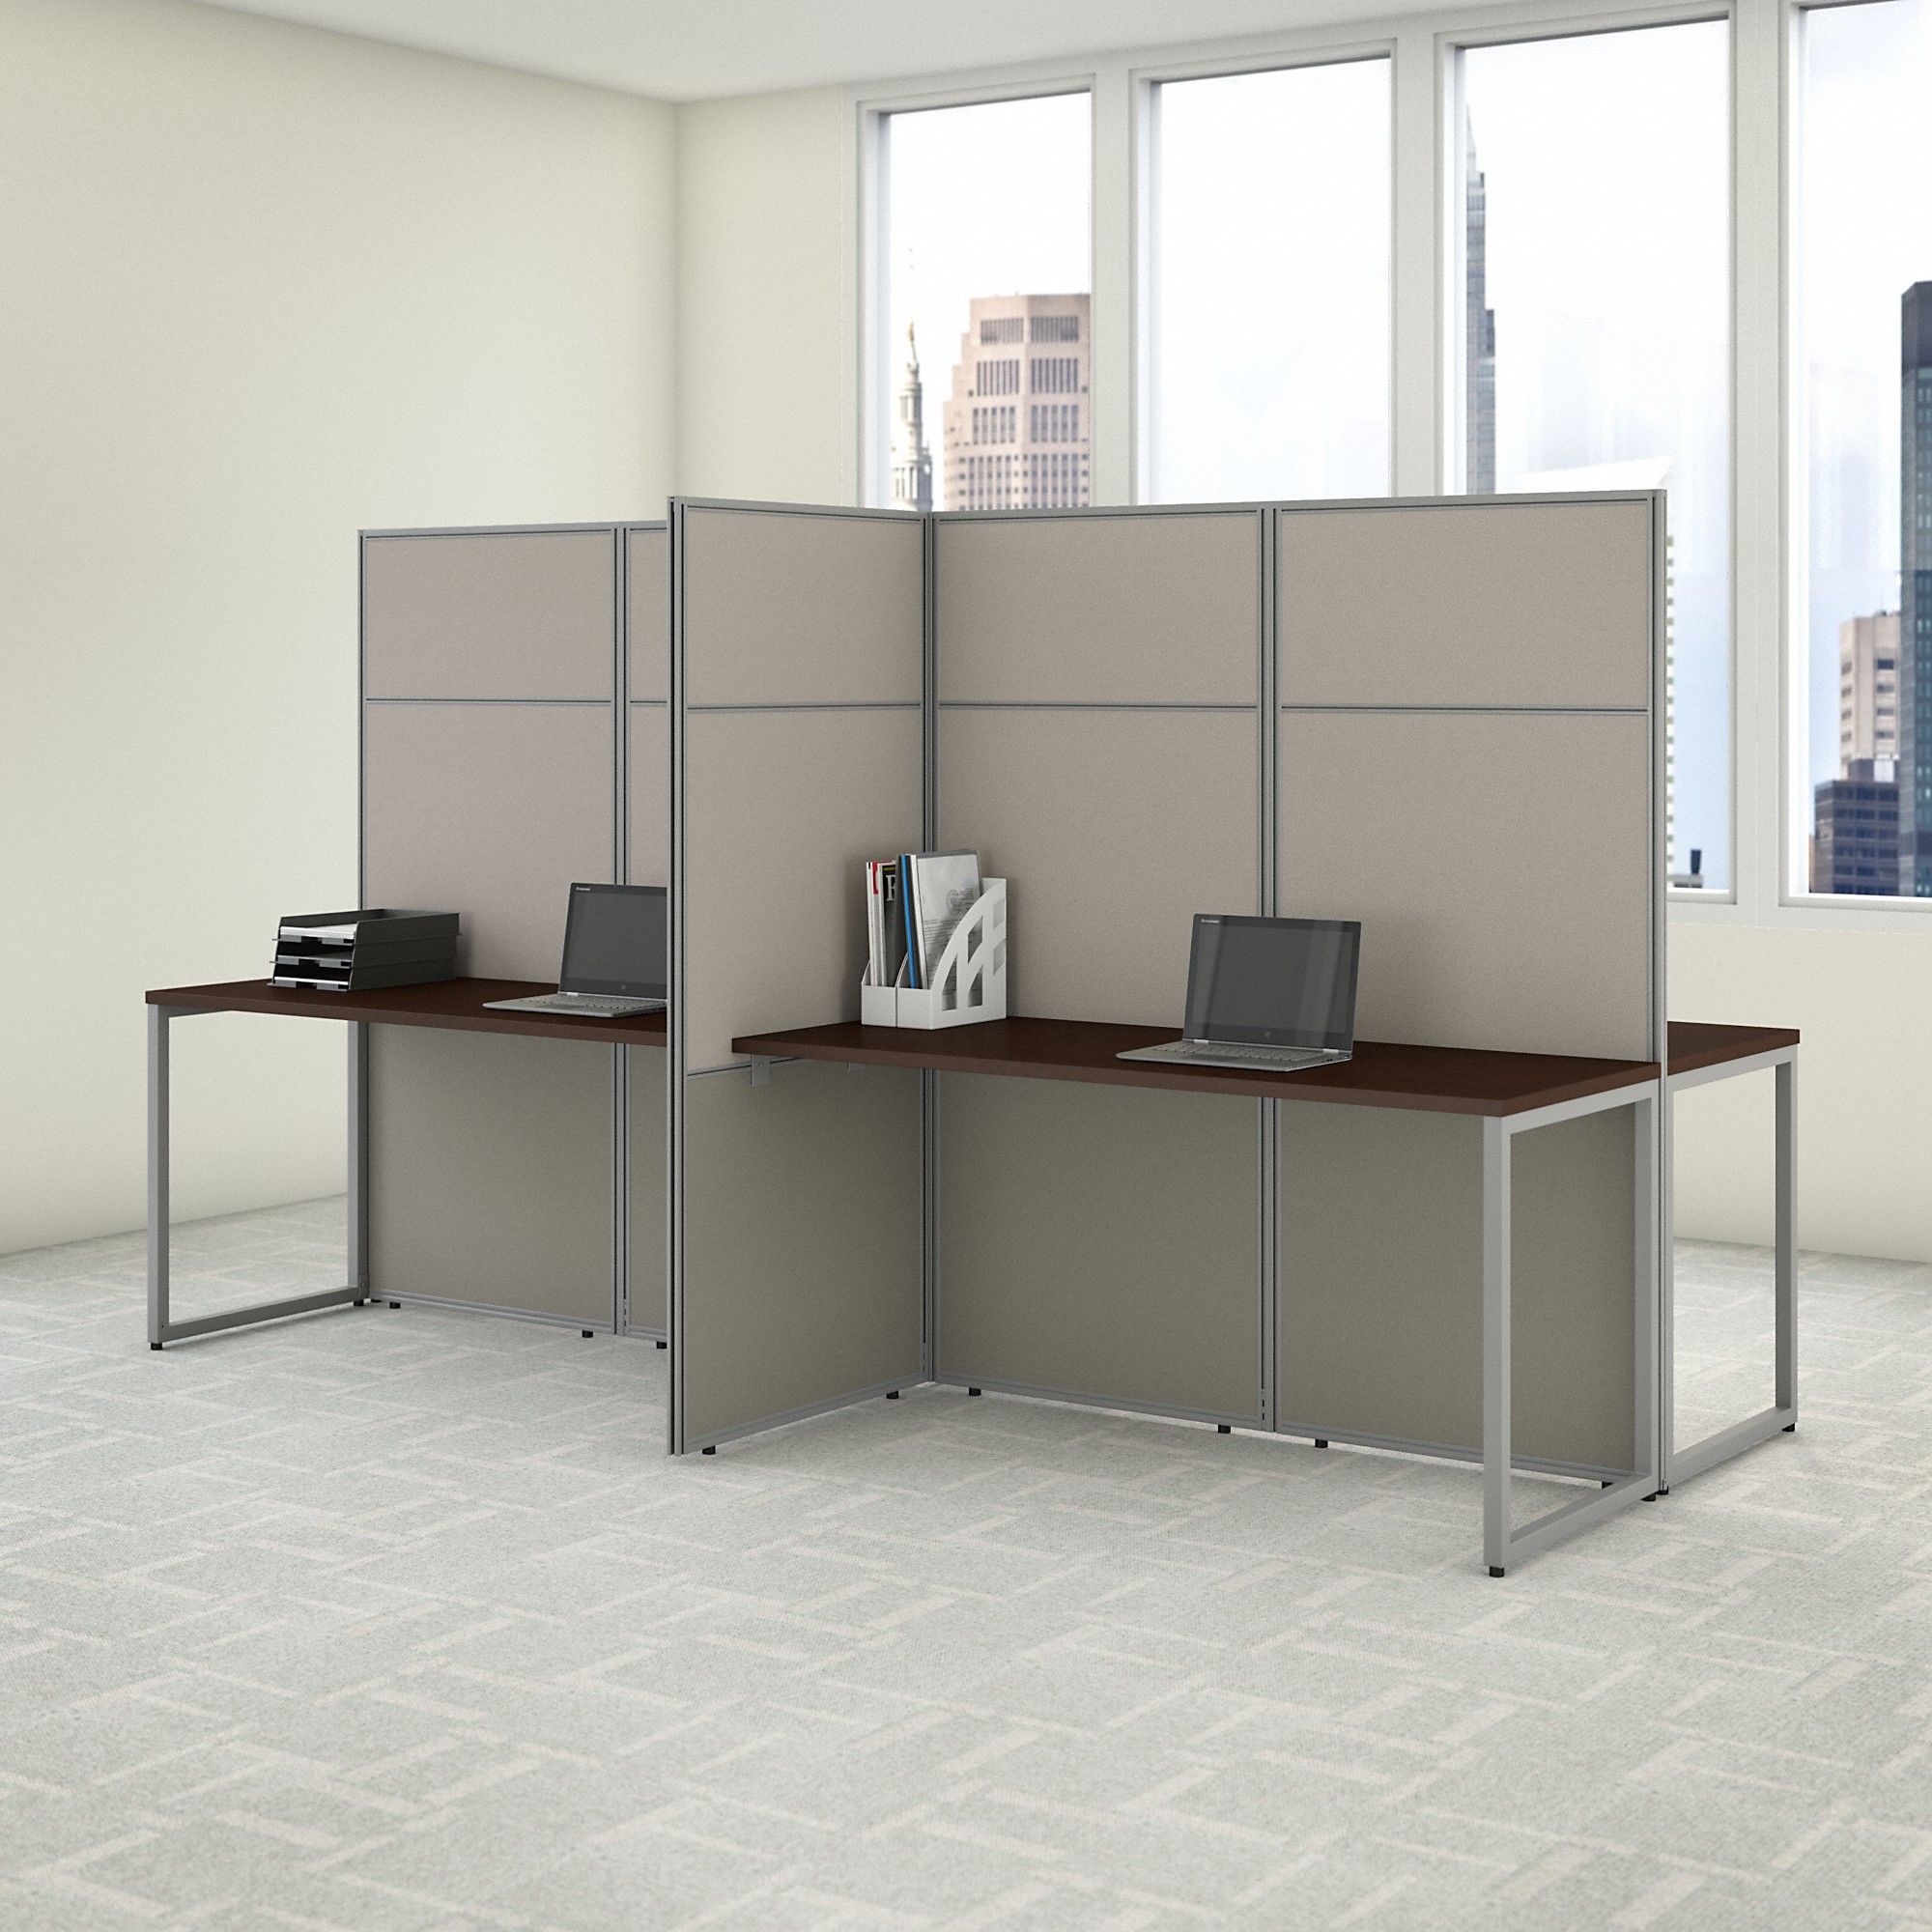 60w x 66h 4 Person Straight Desk Open Office in Brown by Bush